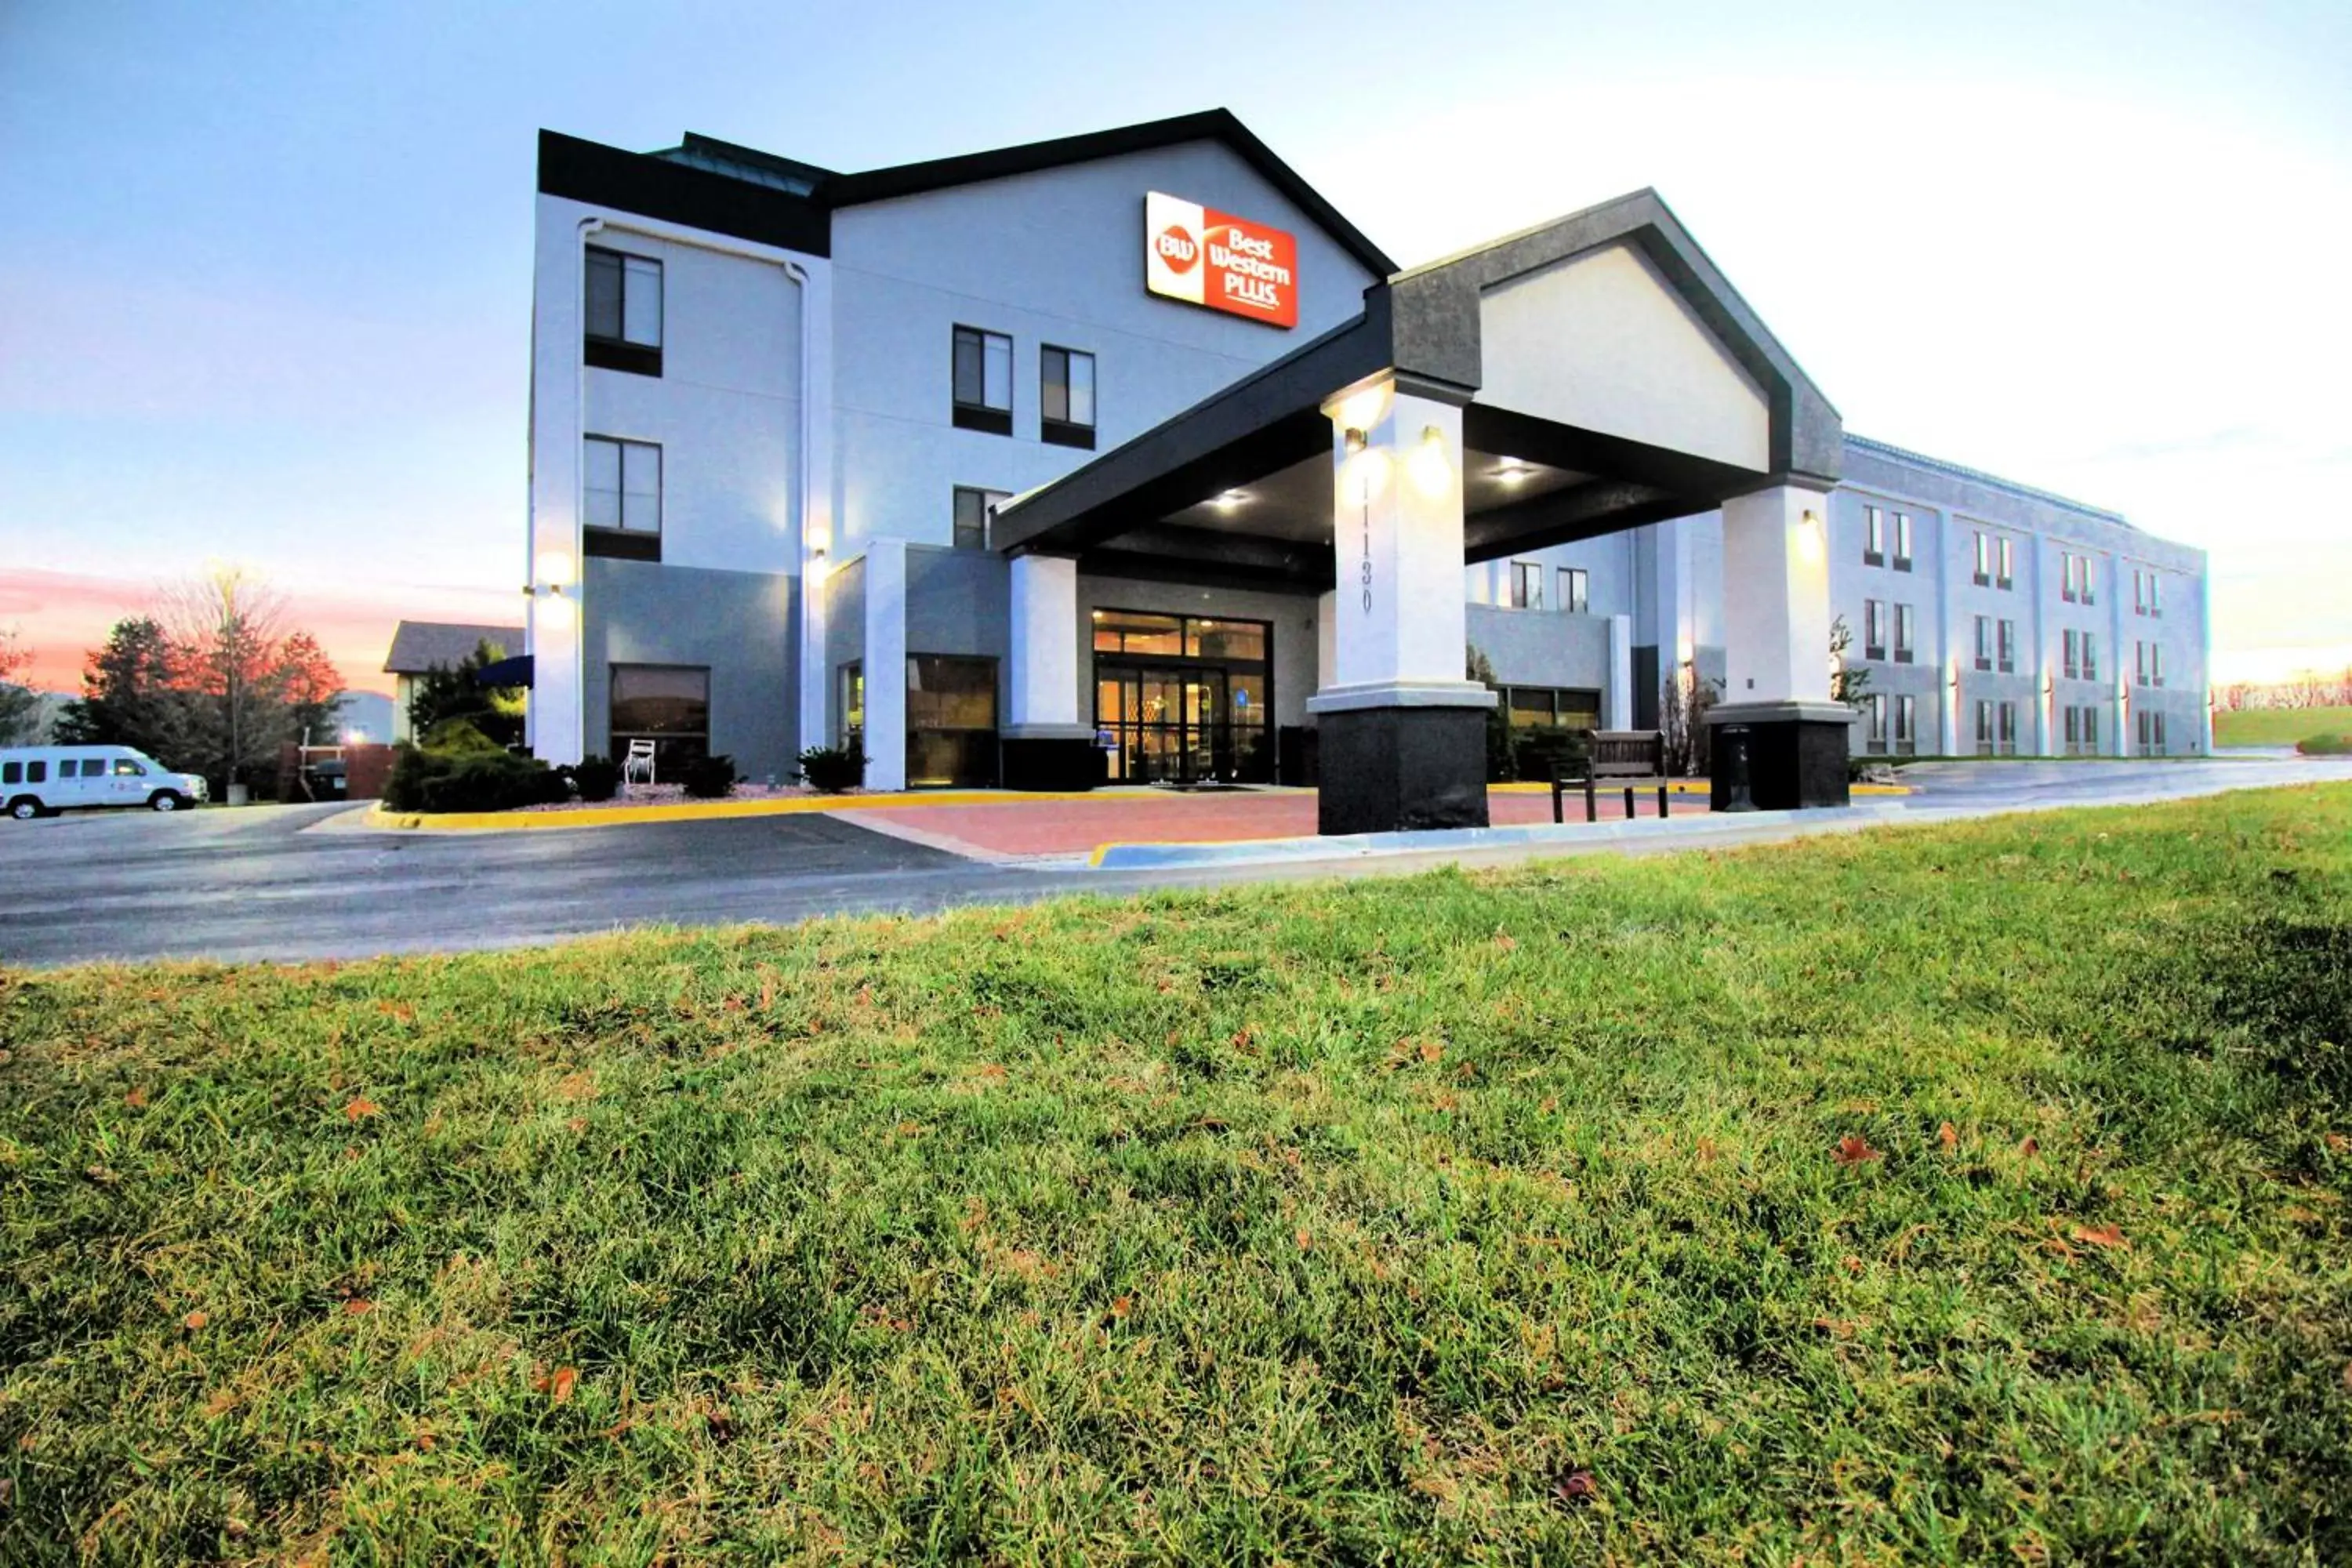 Property building in Best Western Plus Kansas City Airport - KCI East